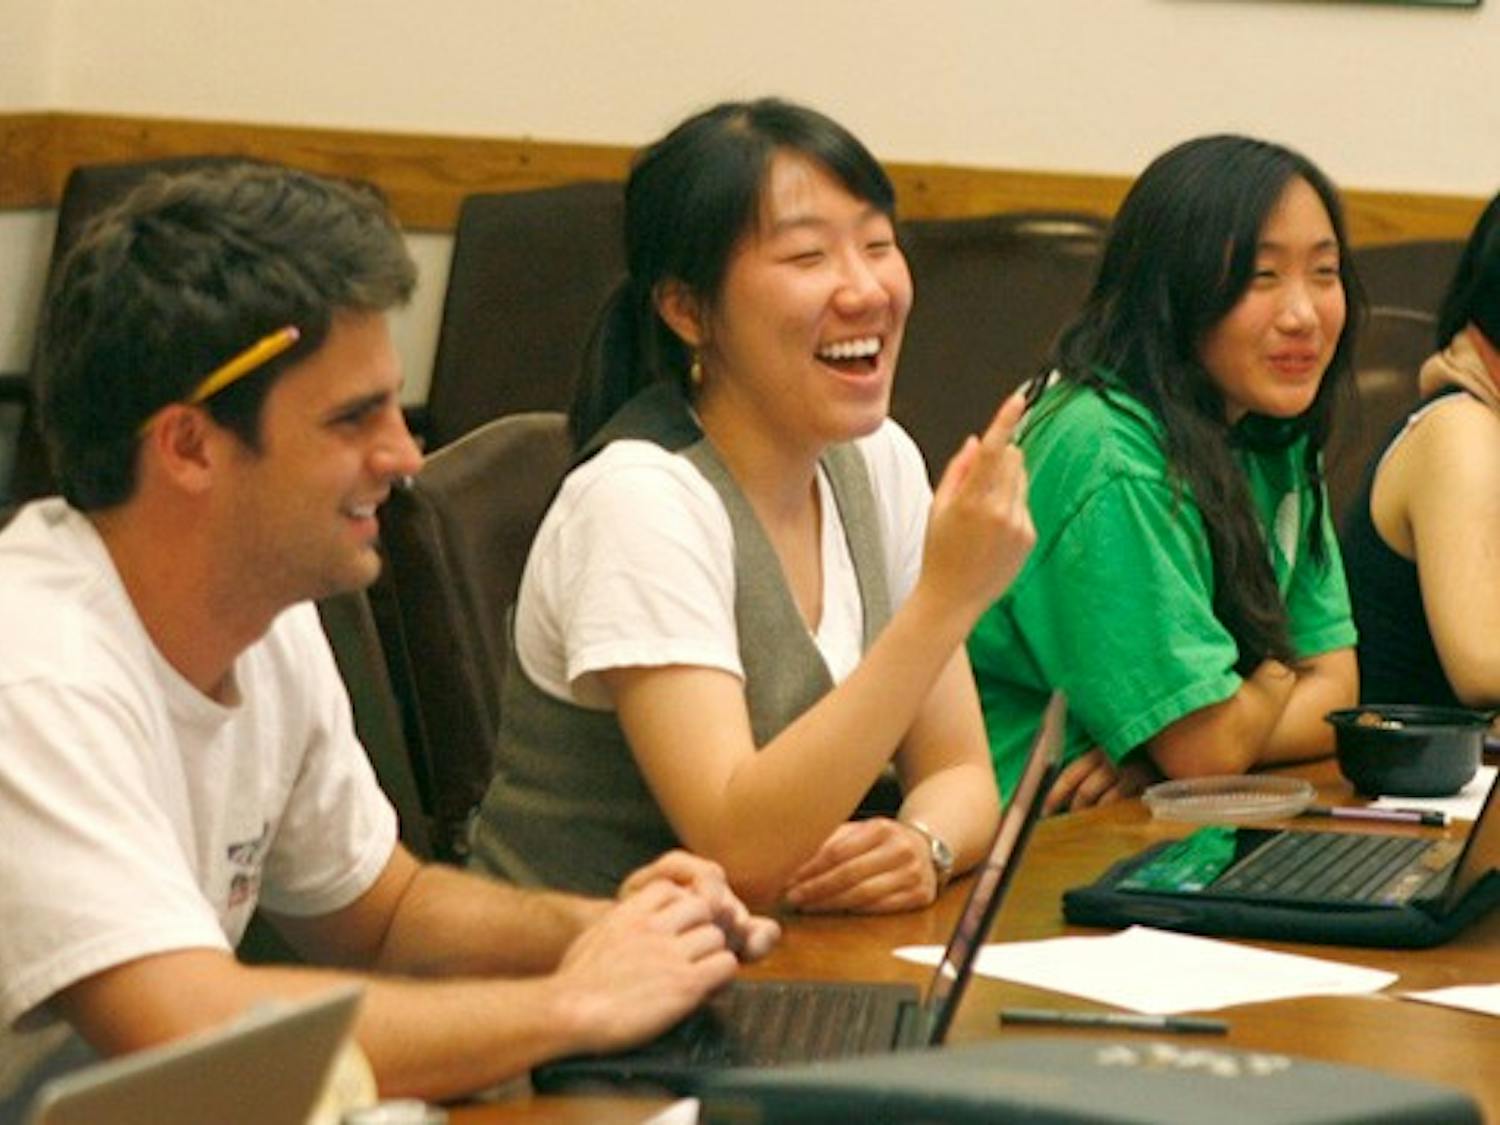 DUU Chief Financial Officer Ben Condon (left) and President Yi Zhang share a laugh at Tuesday’s DUU meeting. At the meeting, the union finalized its 2010-11 budget allocations among its 15 committees.